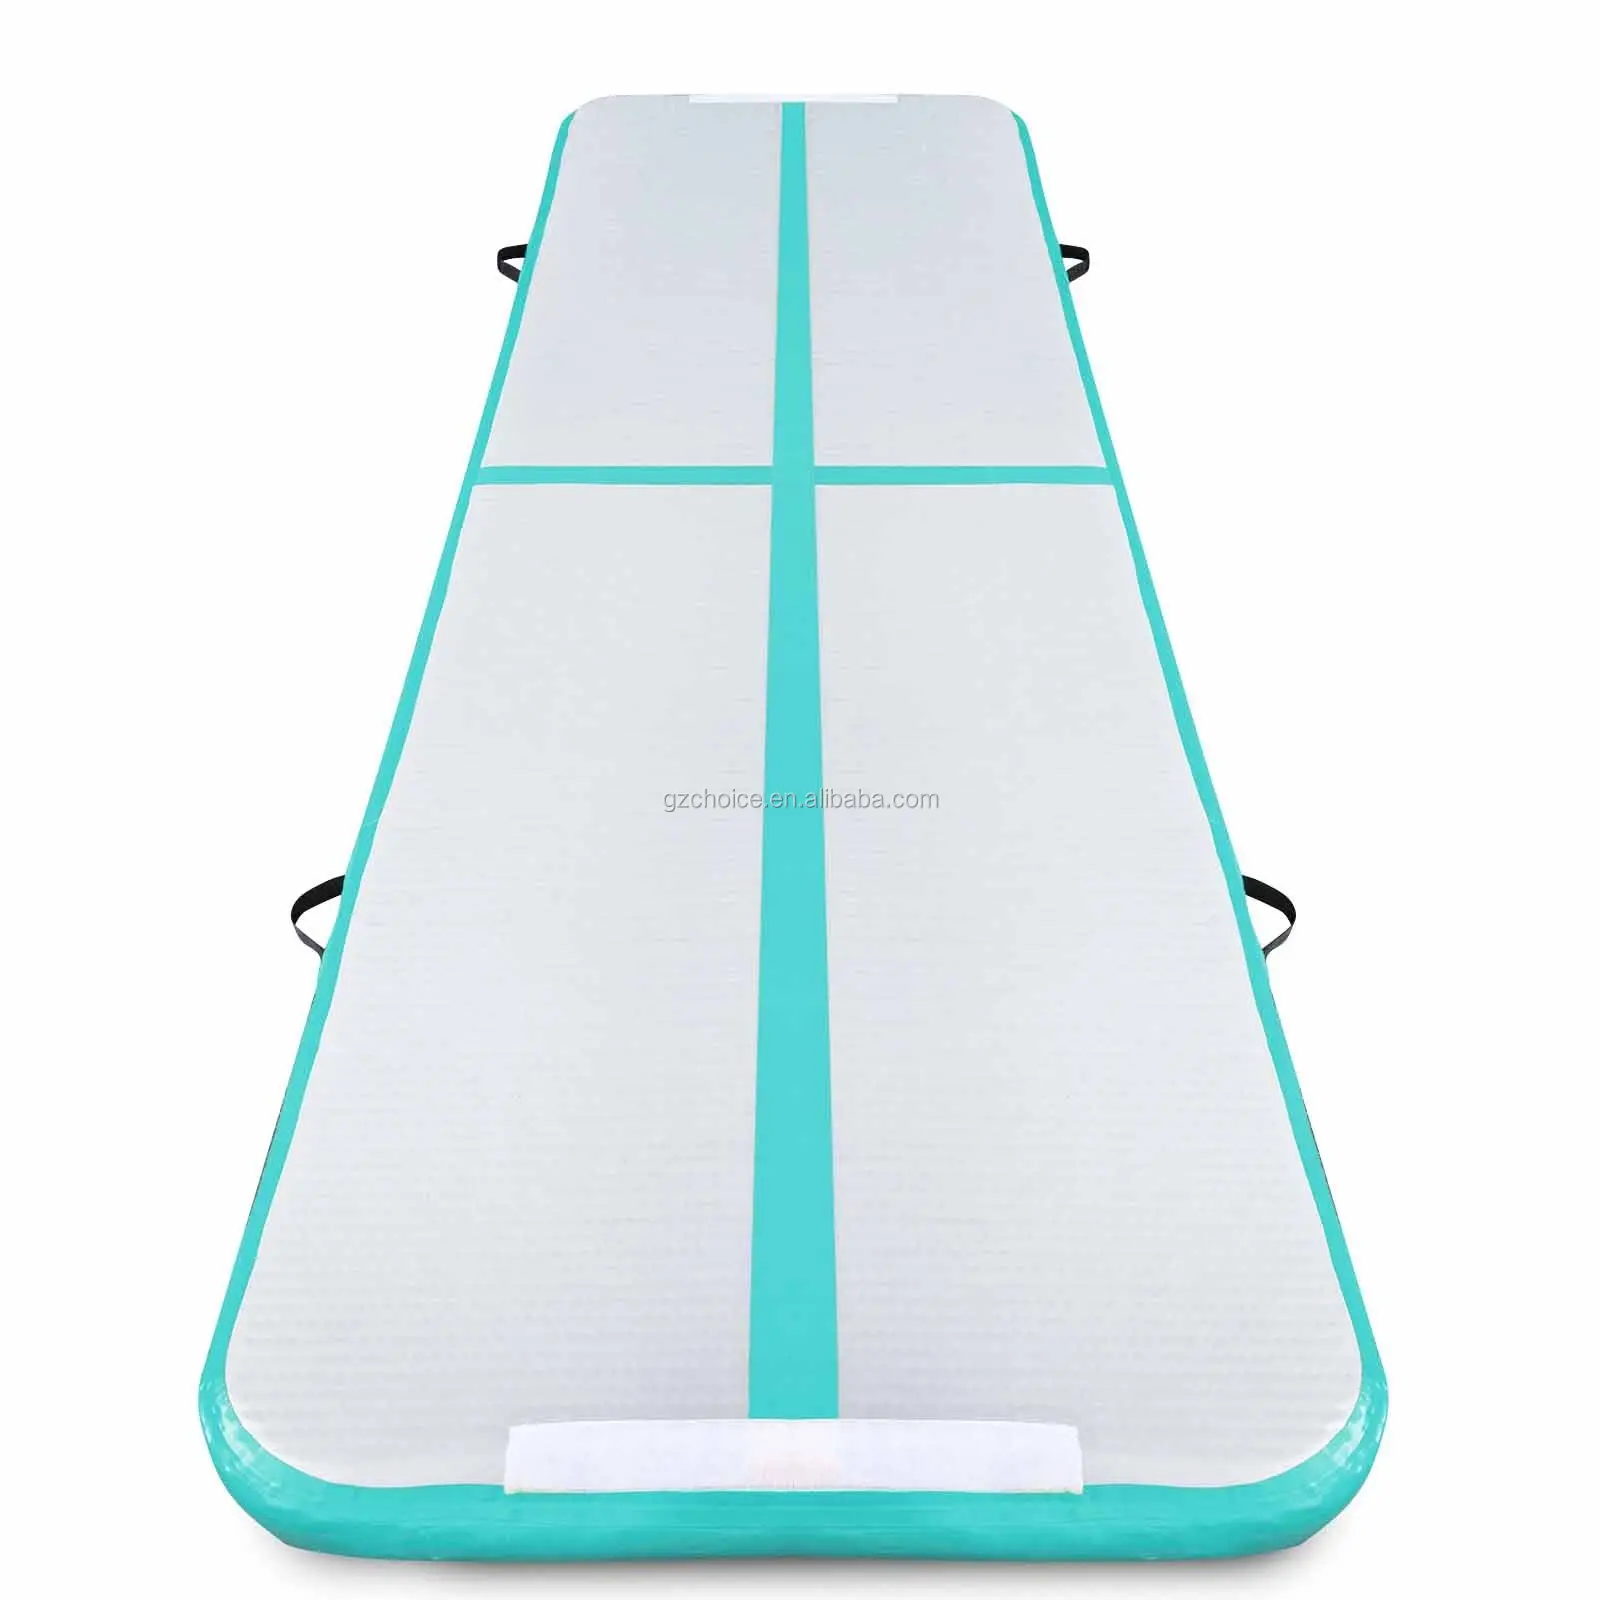 

Factory Wholesale Outdoor 3m 6m 8m 10m Air Tumbling Track Inflatable Yoga Mat, Multi-color